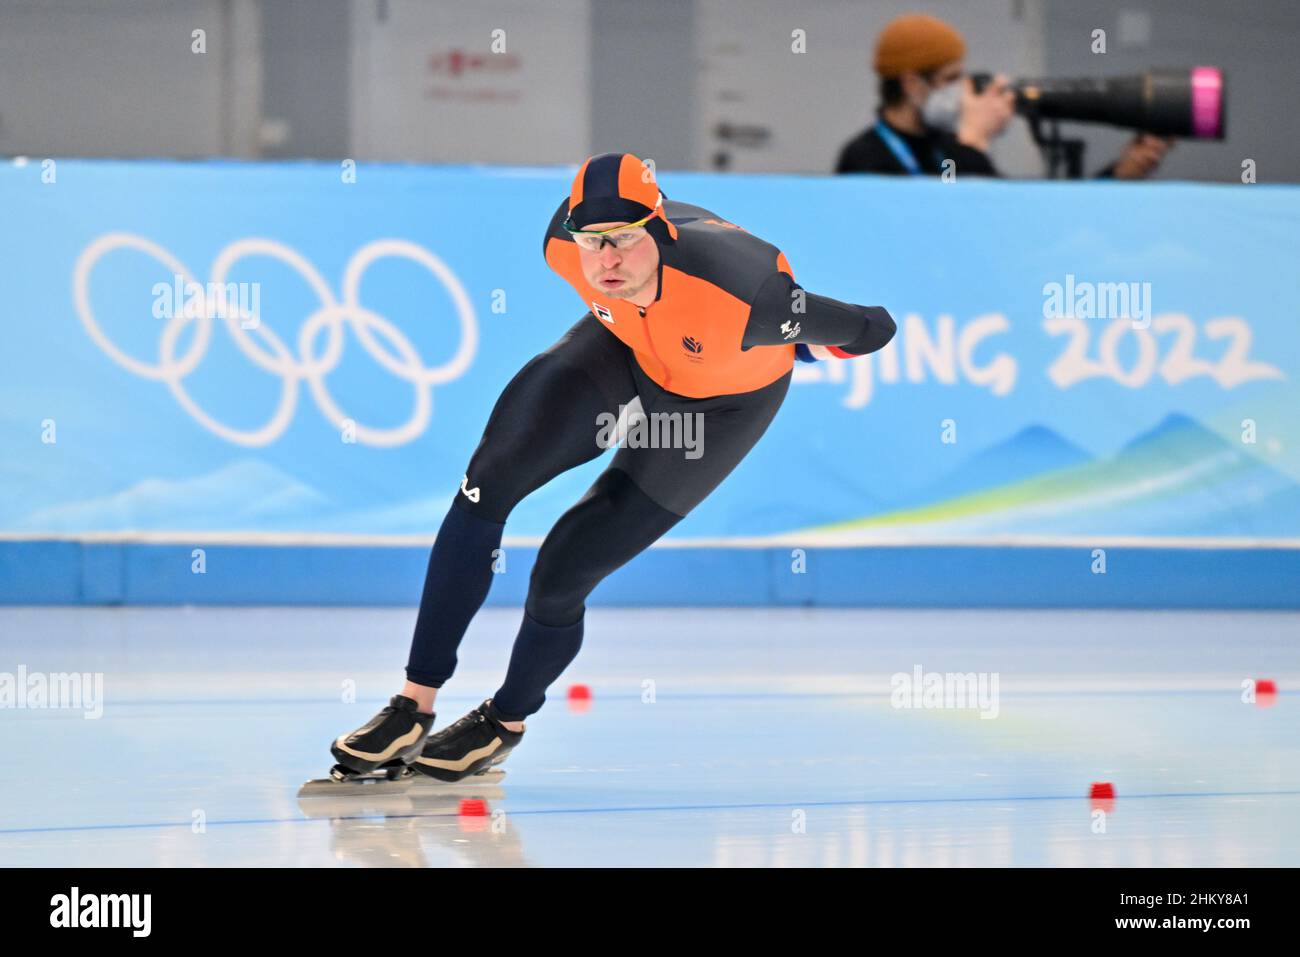 Peking, China. 06th Feb, 2022. Speed skating, Olympics, 5000 m, men at National Speed Skating Oval. Sven Kramer from the Netherlands on the track. Credit: Peter Kneffel/dpa/Alamy Live News Stock Photo